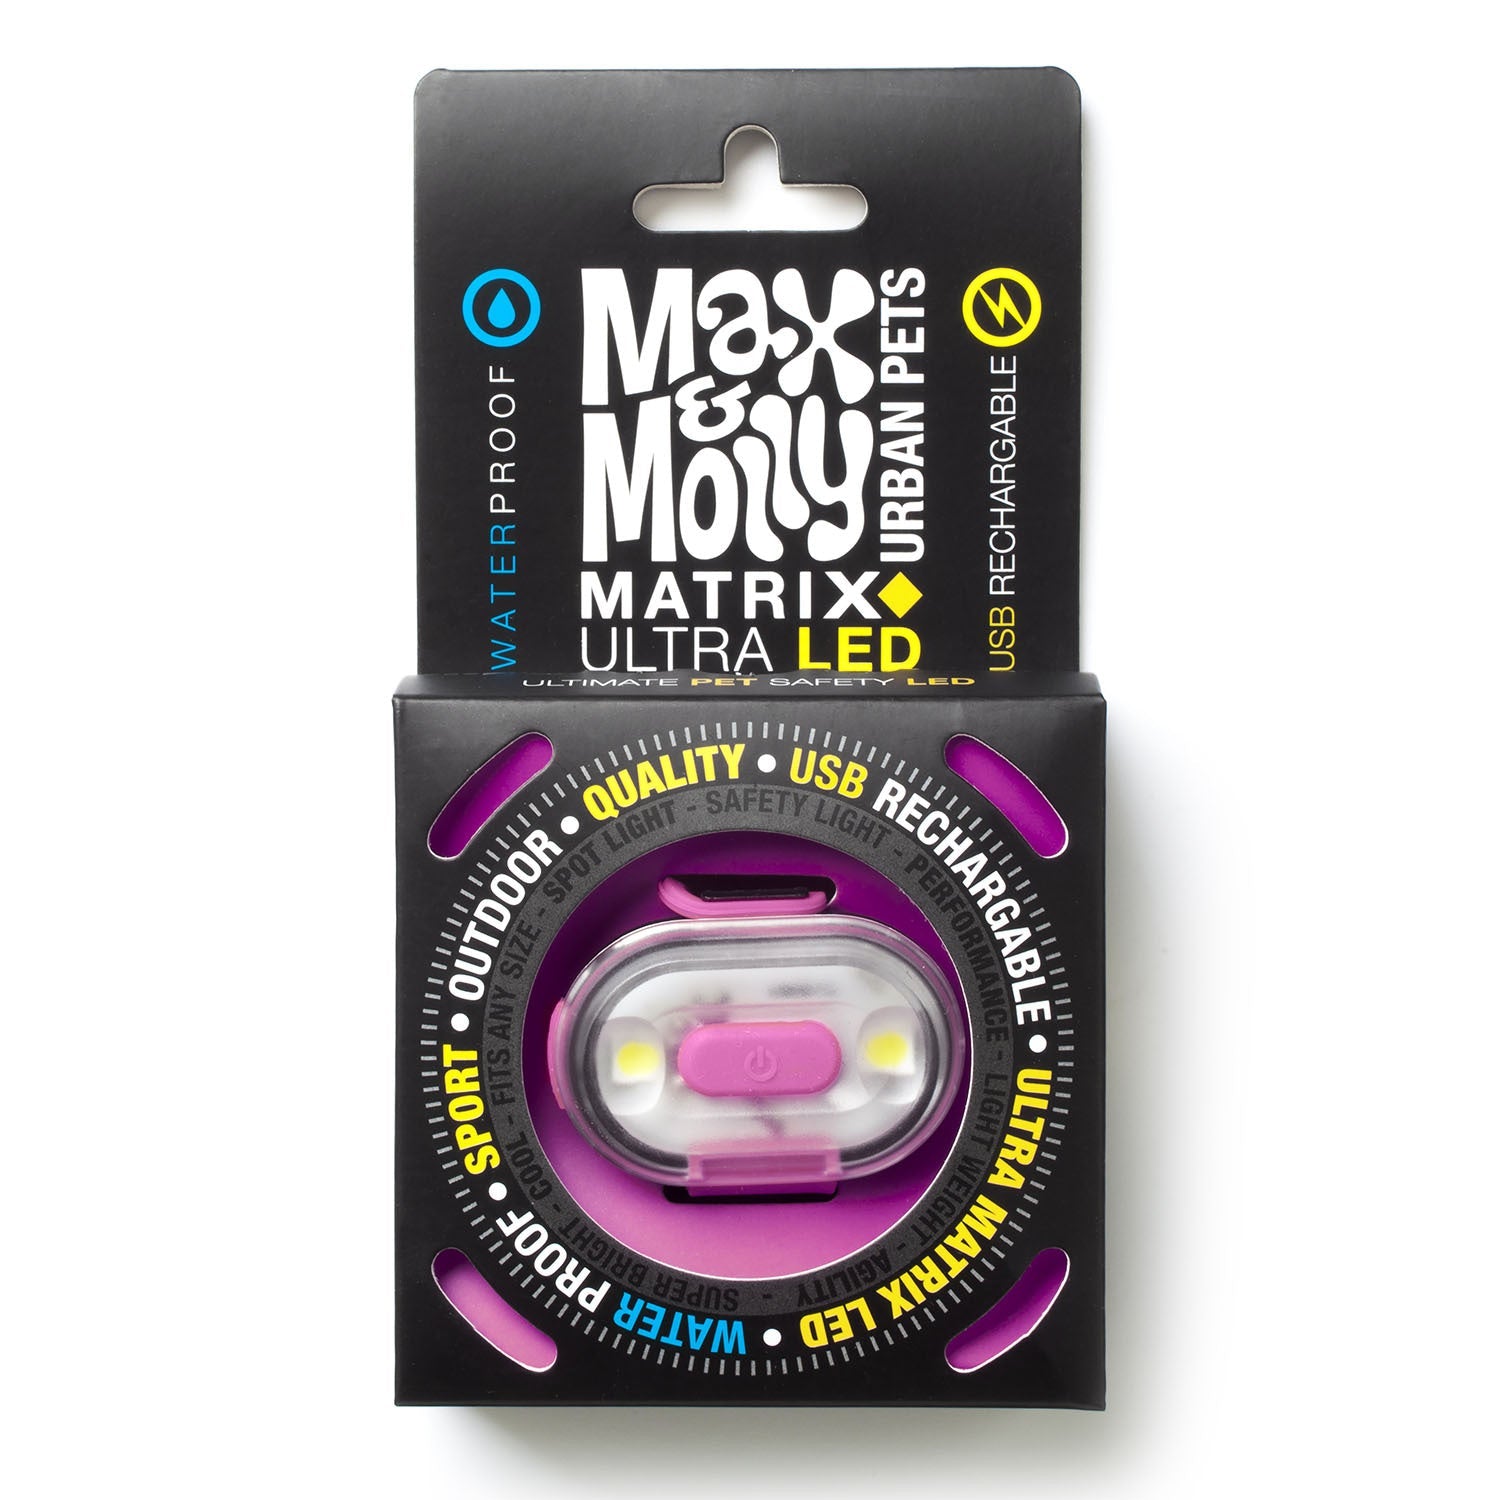 Max & Molly Matrix Ultra LED Harness/Collar Safety light - Pets and More